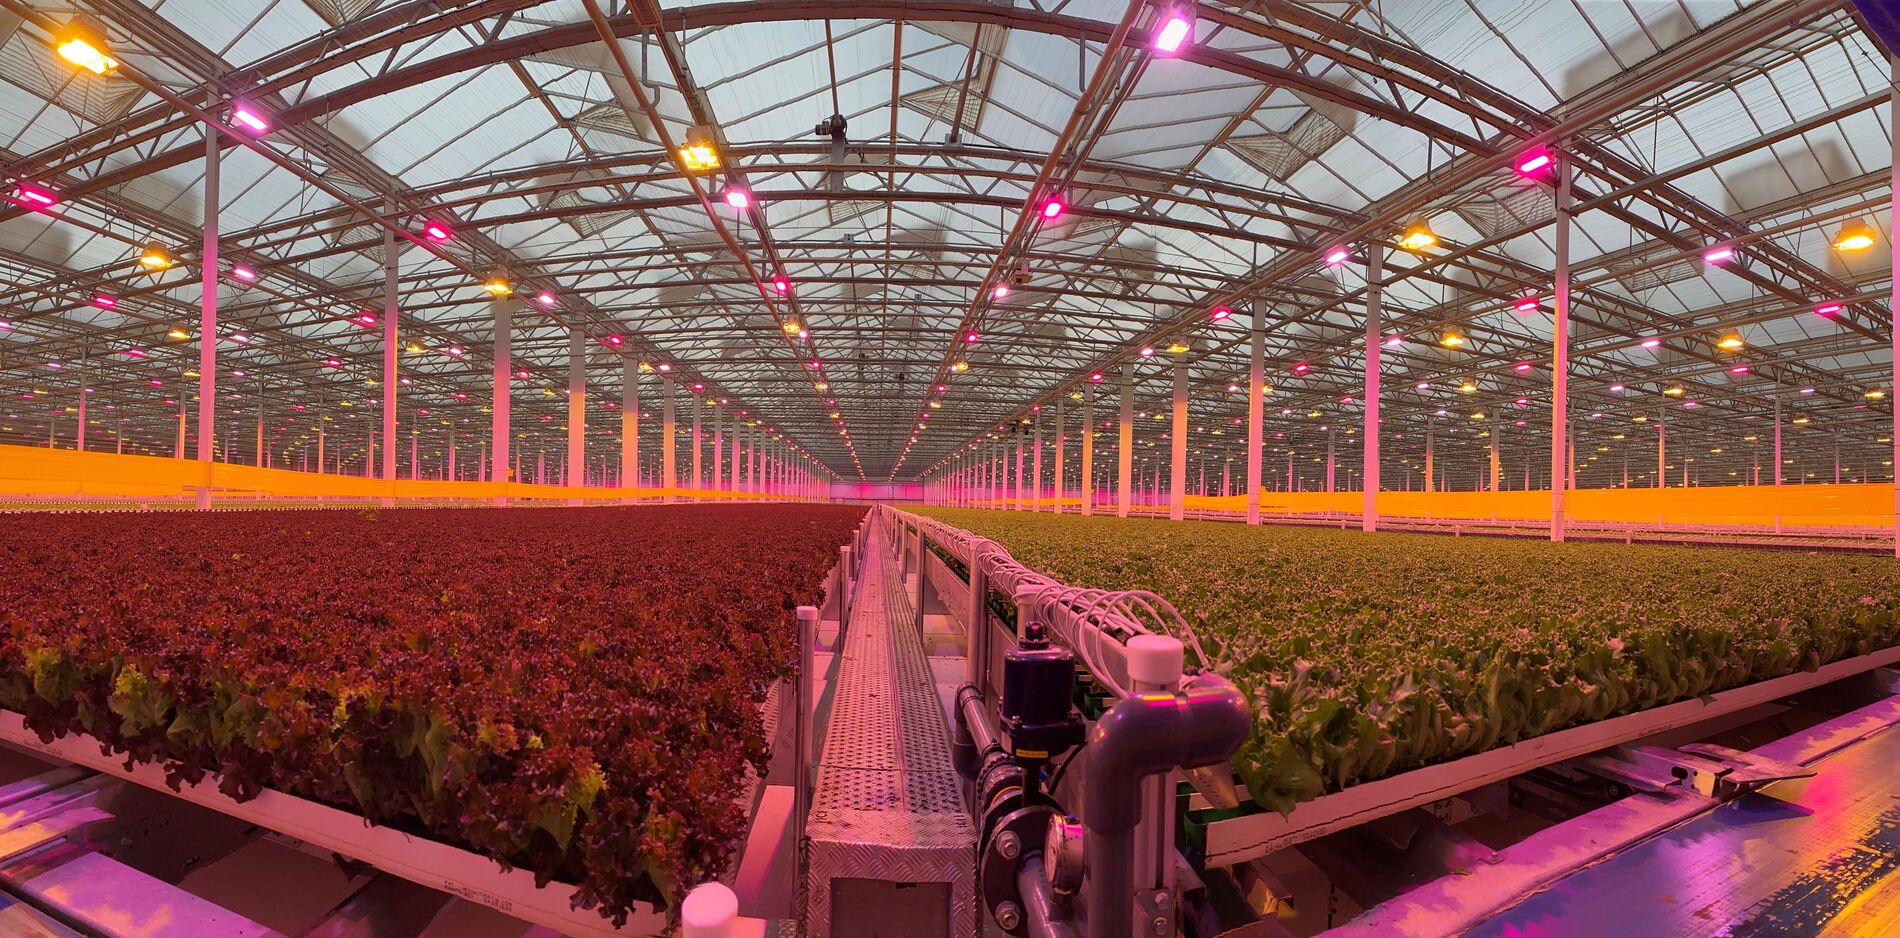 FloralDaily: Ukrainian rose grower sees harvest increase with water cooled LEDs